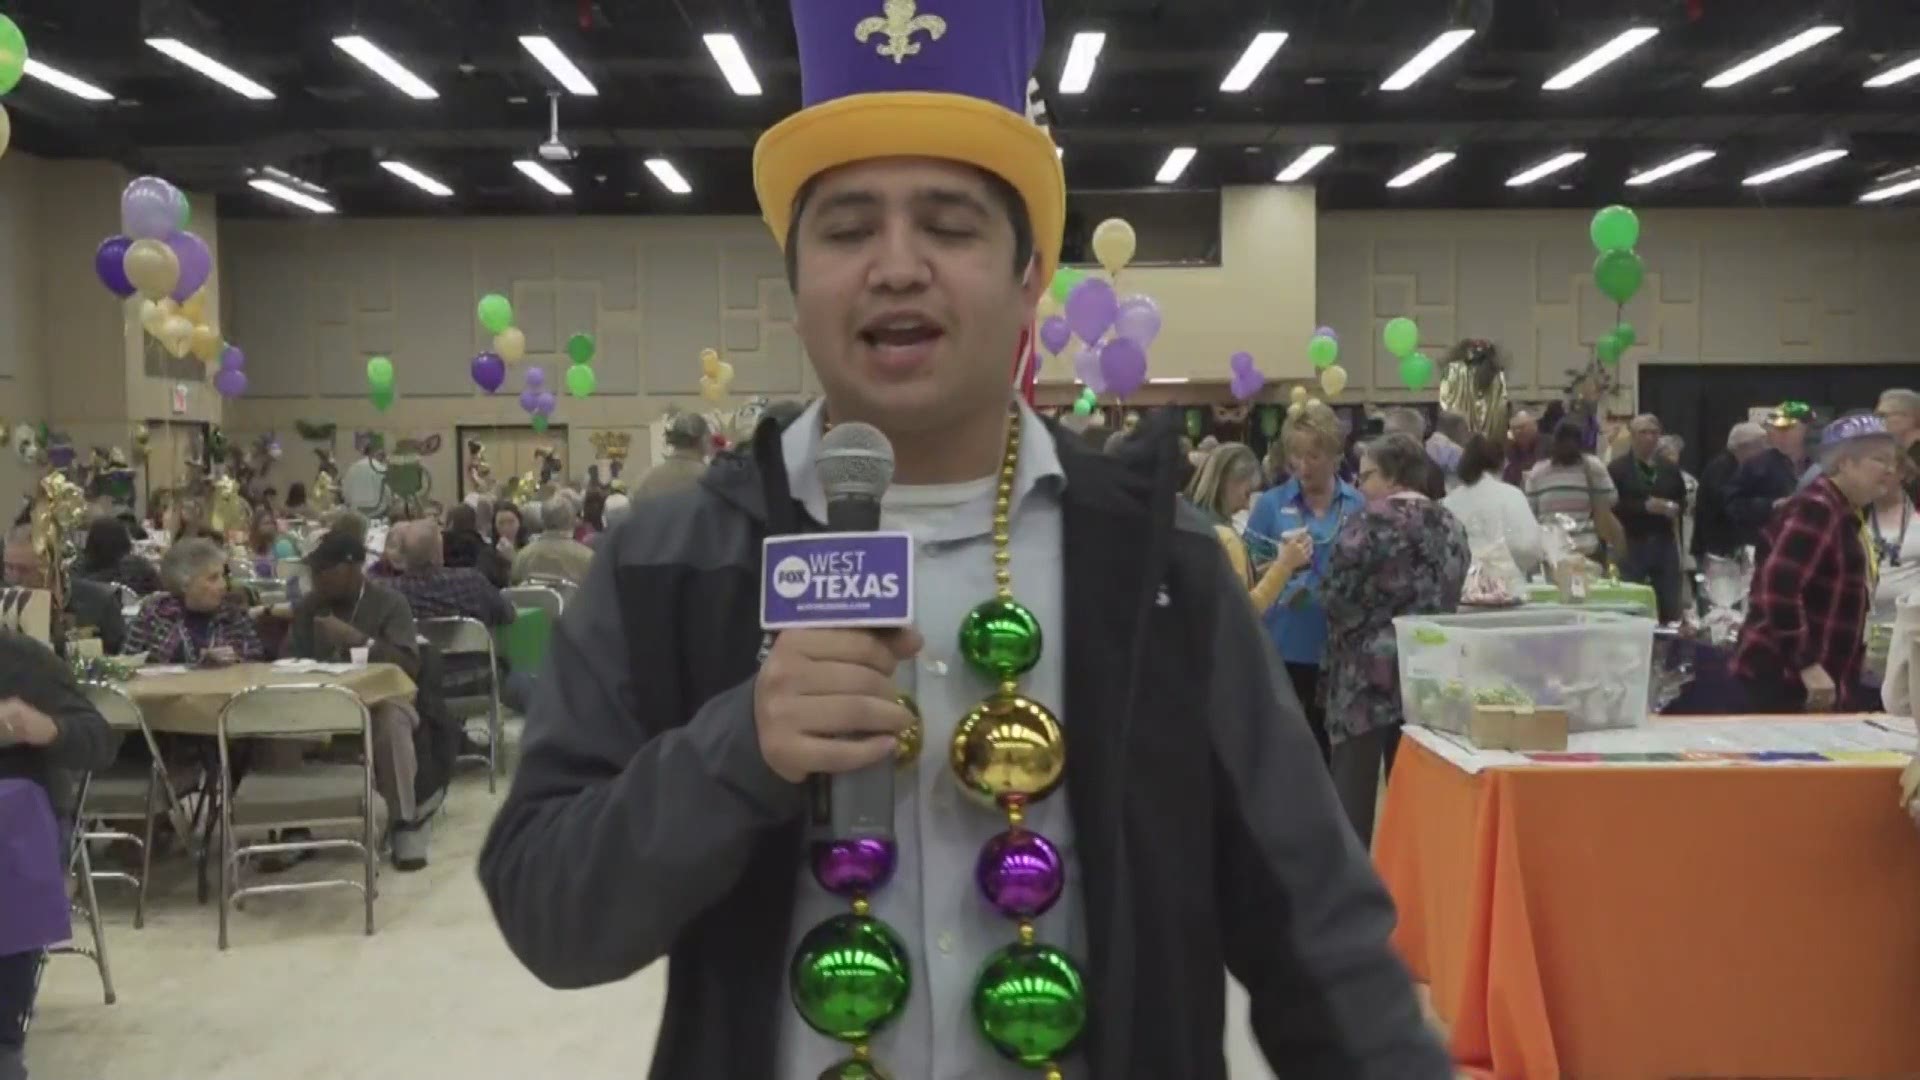 The 20th annual Mardi Gras party keeps going because of the volunteers